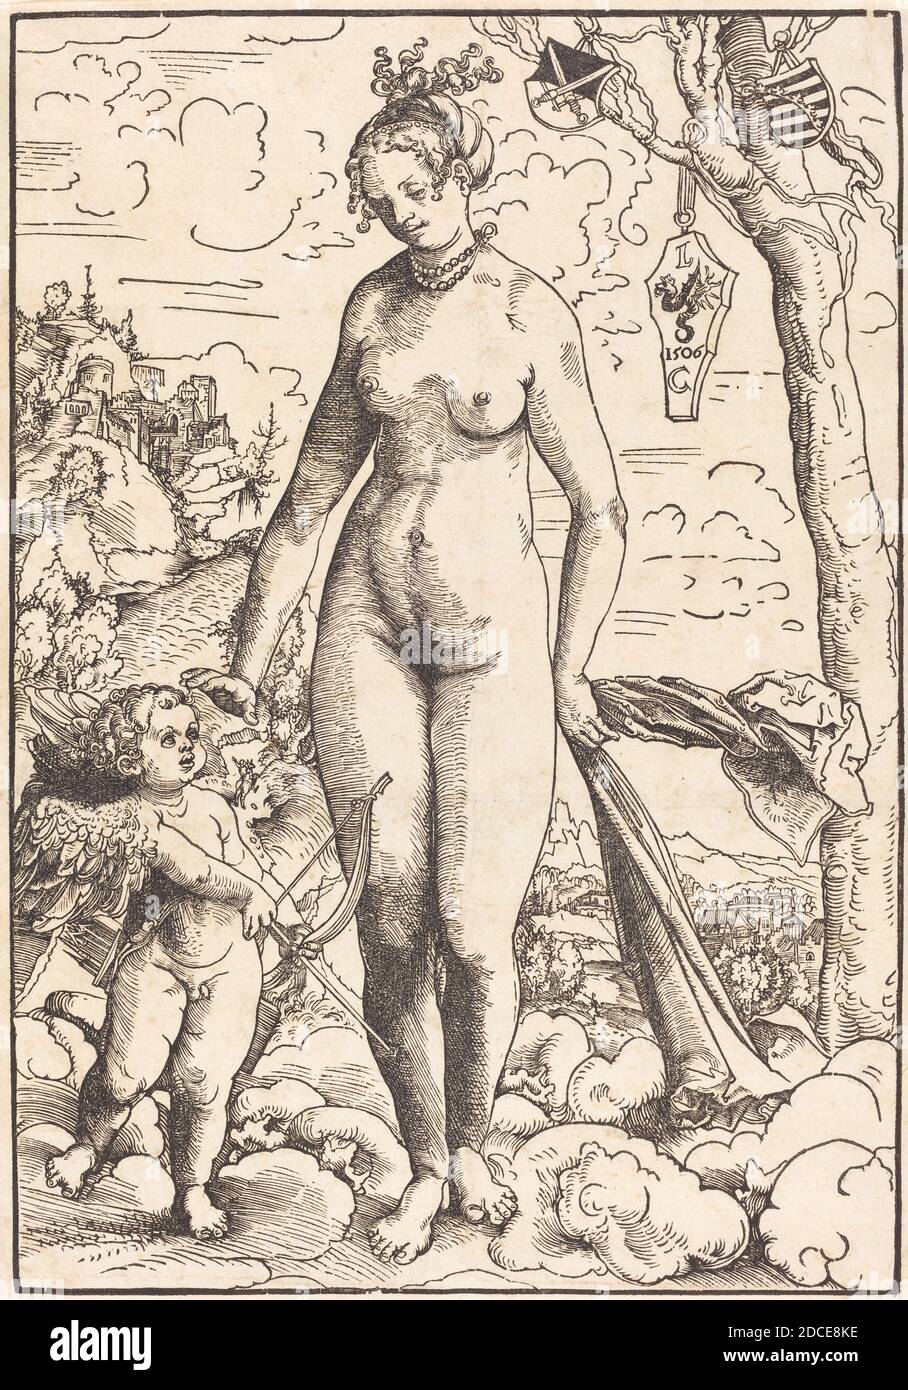 Lucas Cranach the Elder, (artist), German, 1472 - 1553, Venus and Cupid, dated 1506 (probably executed c. 1509), woodcut, sheet: 28.7 x 20.2 cm (11 5/16 x 7 15/16 in Stock Photo